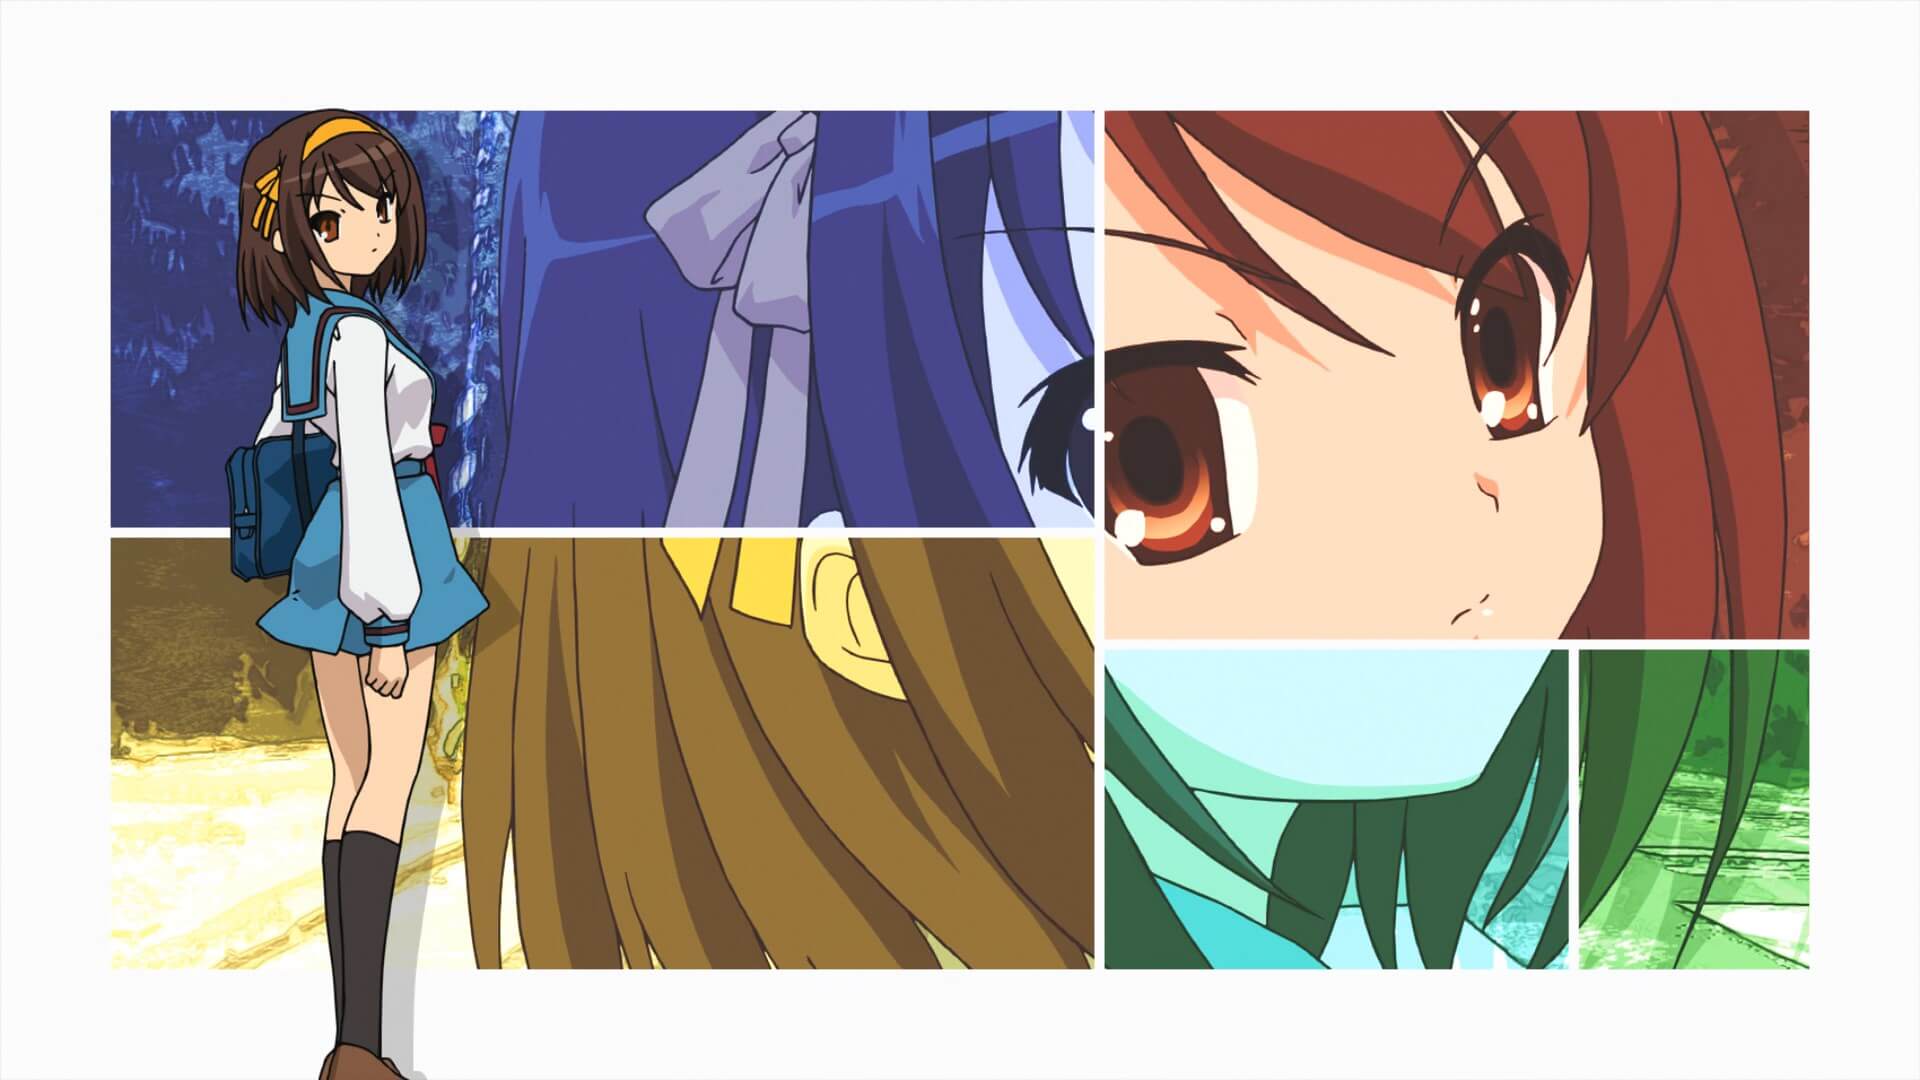 Haruhi Suzumiya gazes into the camera in the opening for her titular series.